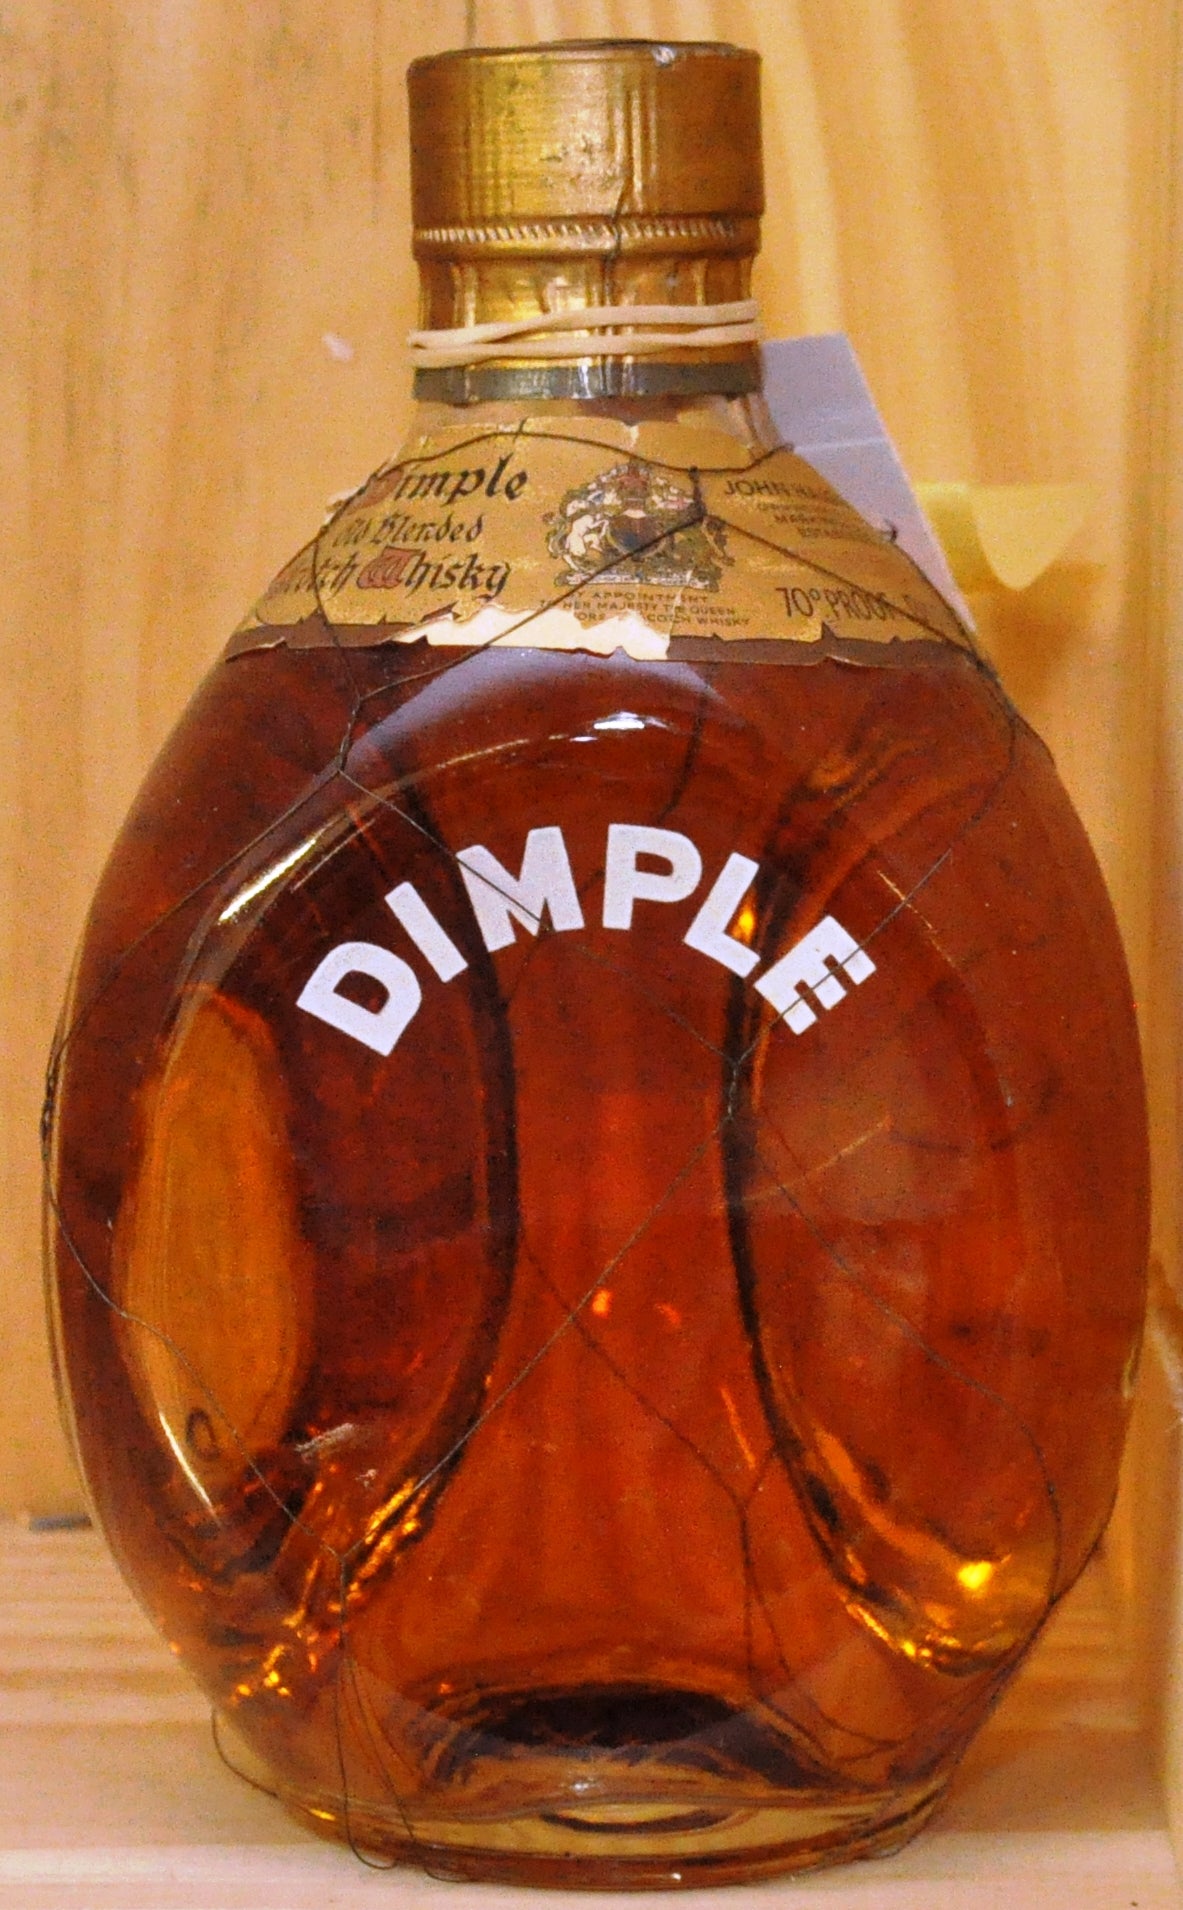 Haig - Dimple - Deluxe Blend - 26 2/3 fl. oz. - 70° proof - Whiskey - 